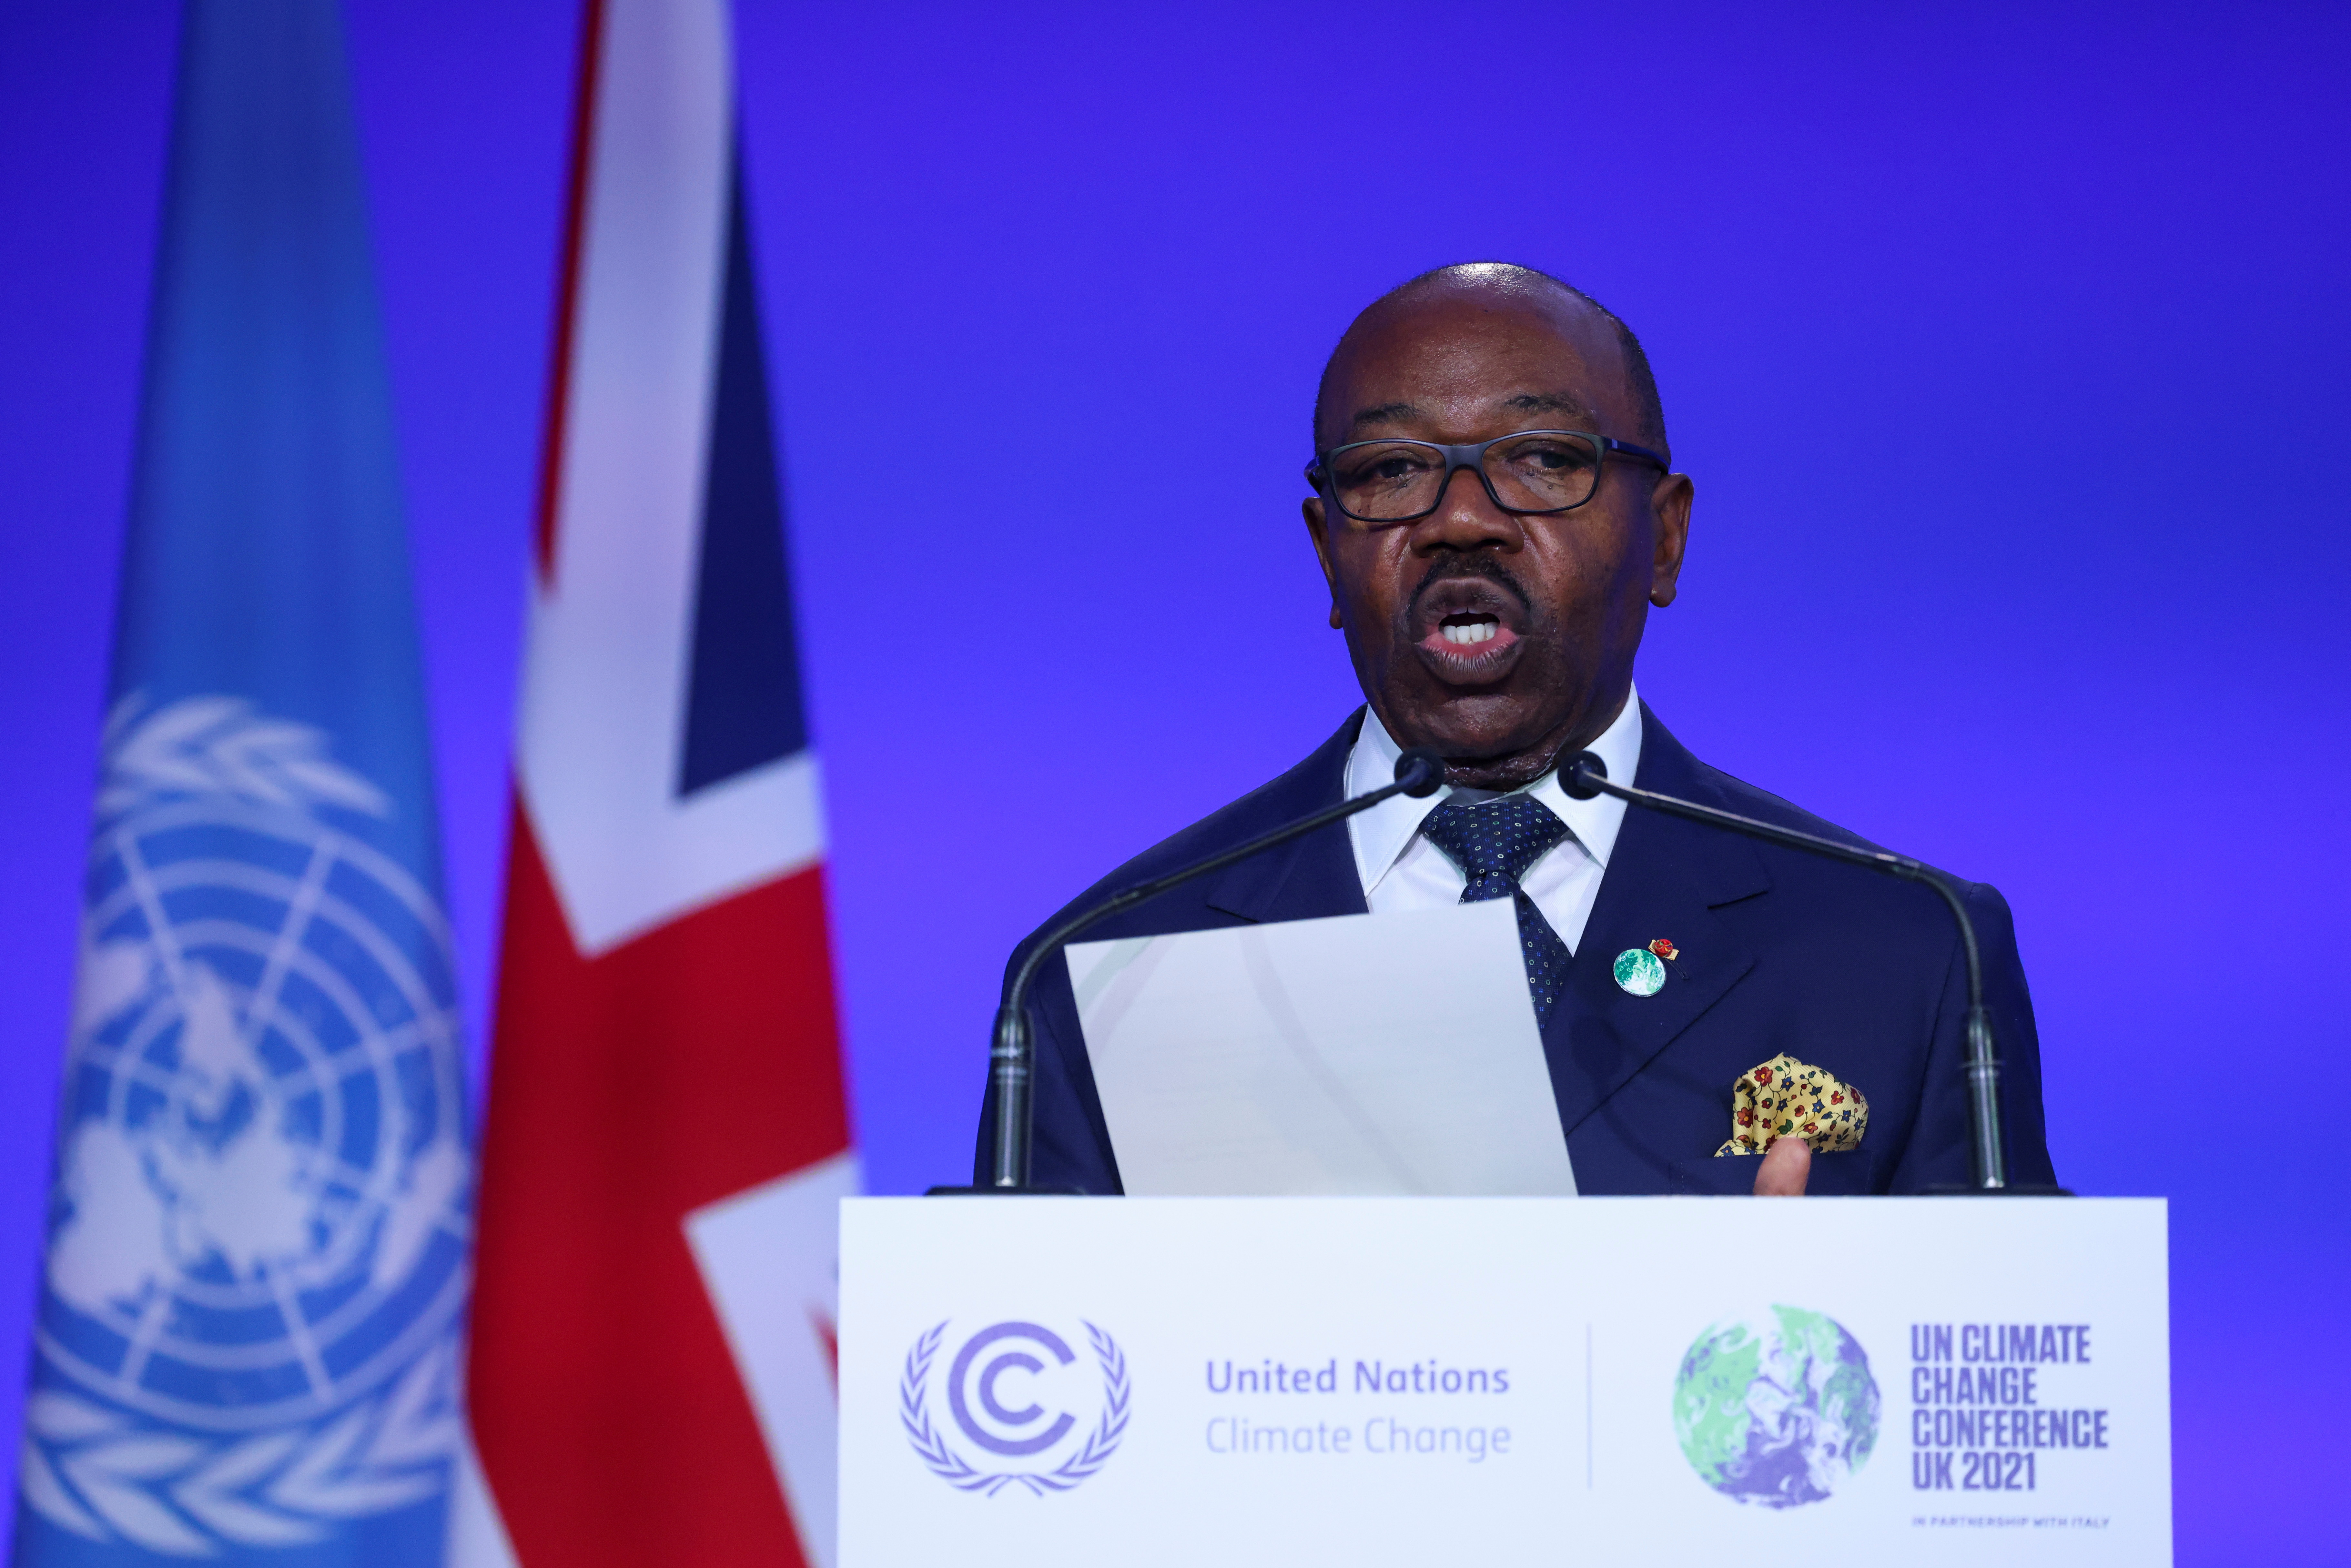 Gabon's President Ali Bongo Ondimba speaks during the UN Climate Change Conference (COP26) in Glasgow, Scotland, Britain, November 1, 2021. REUTERS/Yves Herman